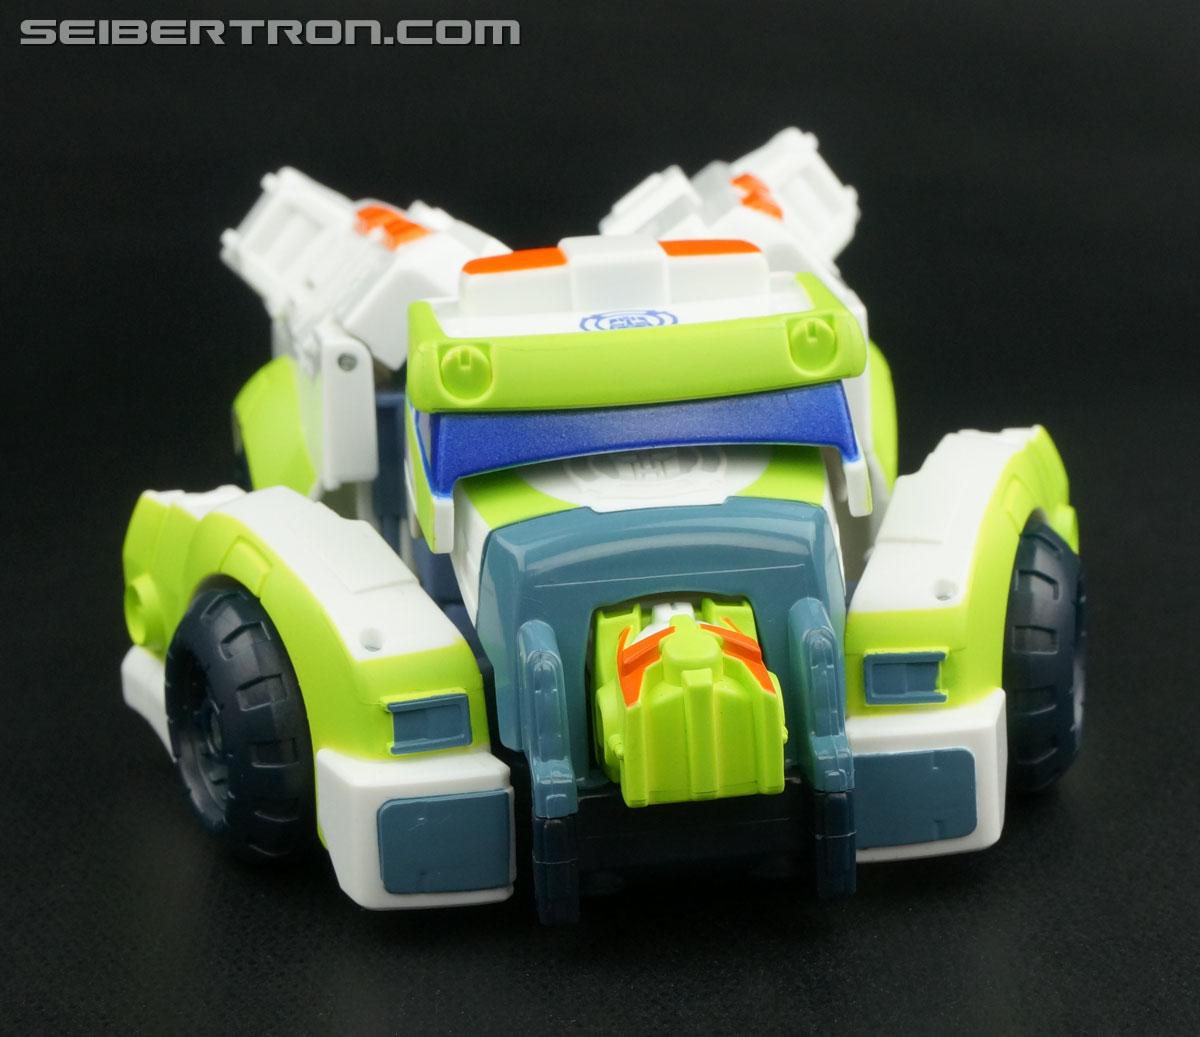 Transformers Rescue Bots Medix the Doc-Bot (Image #52 of 61)